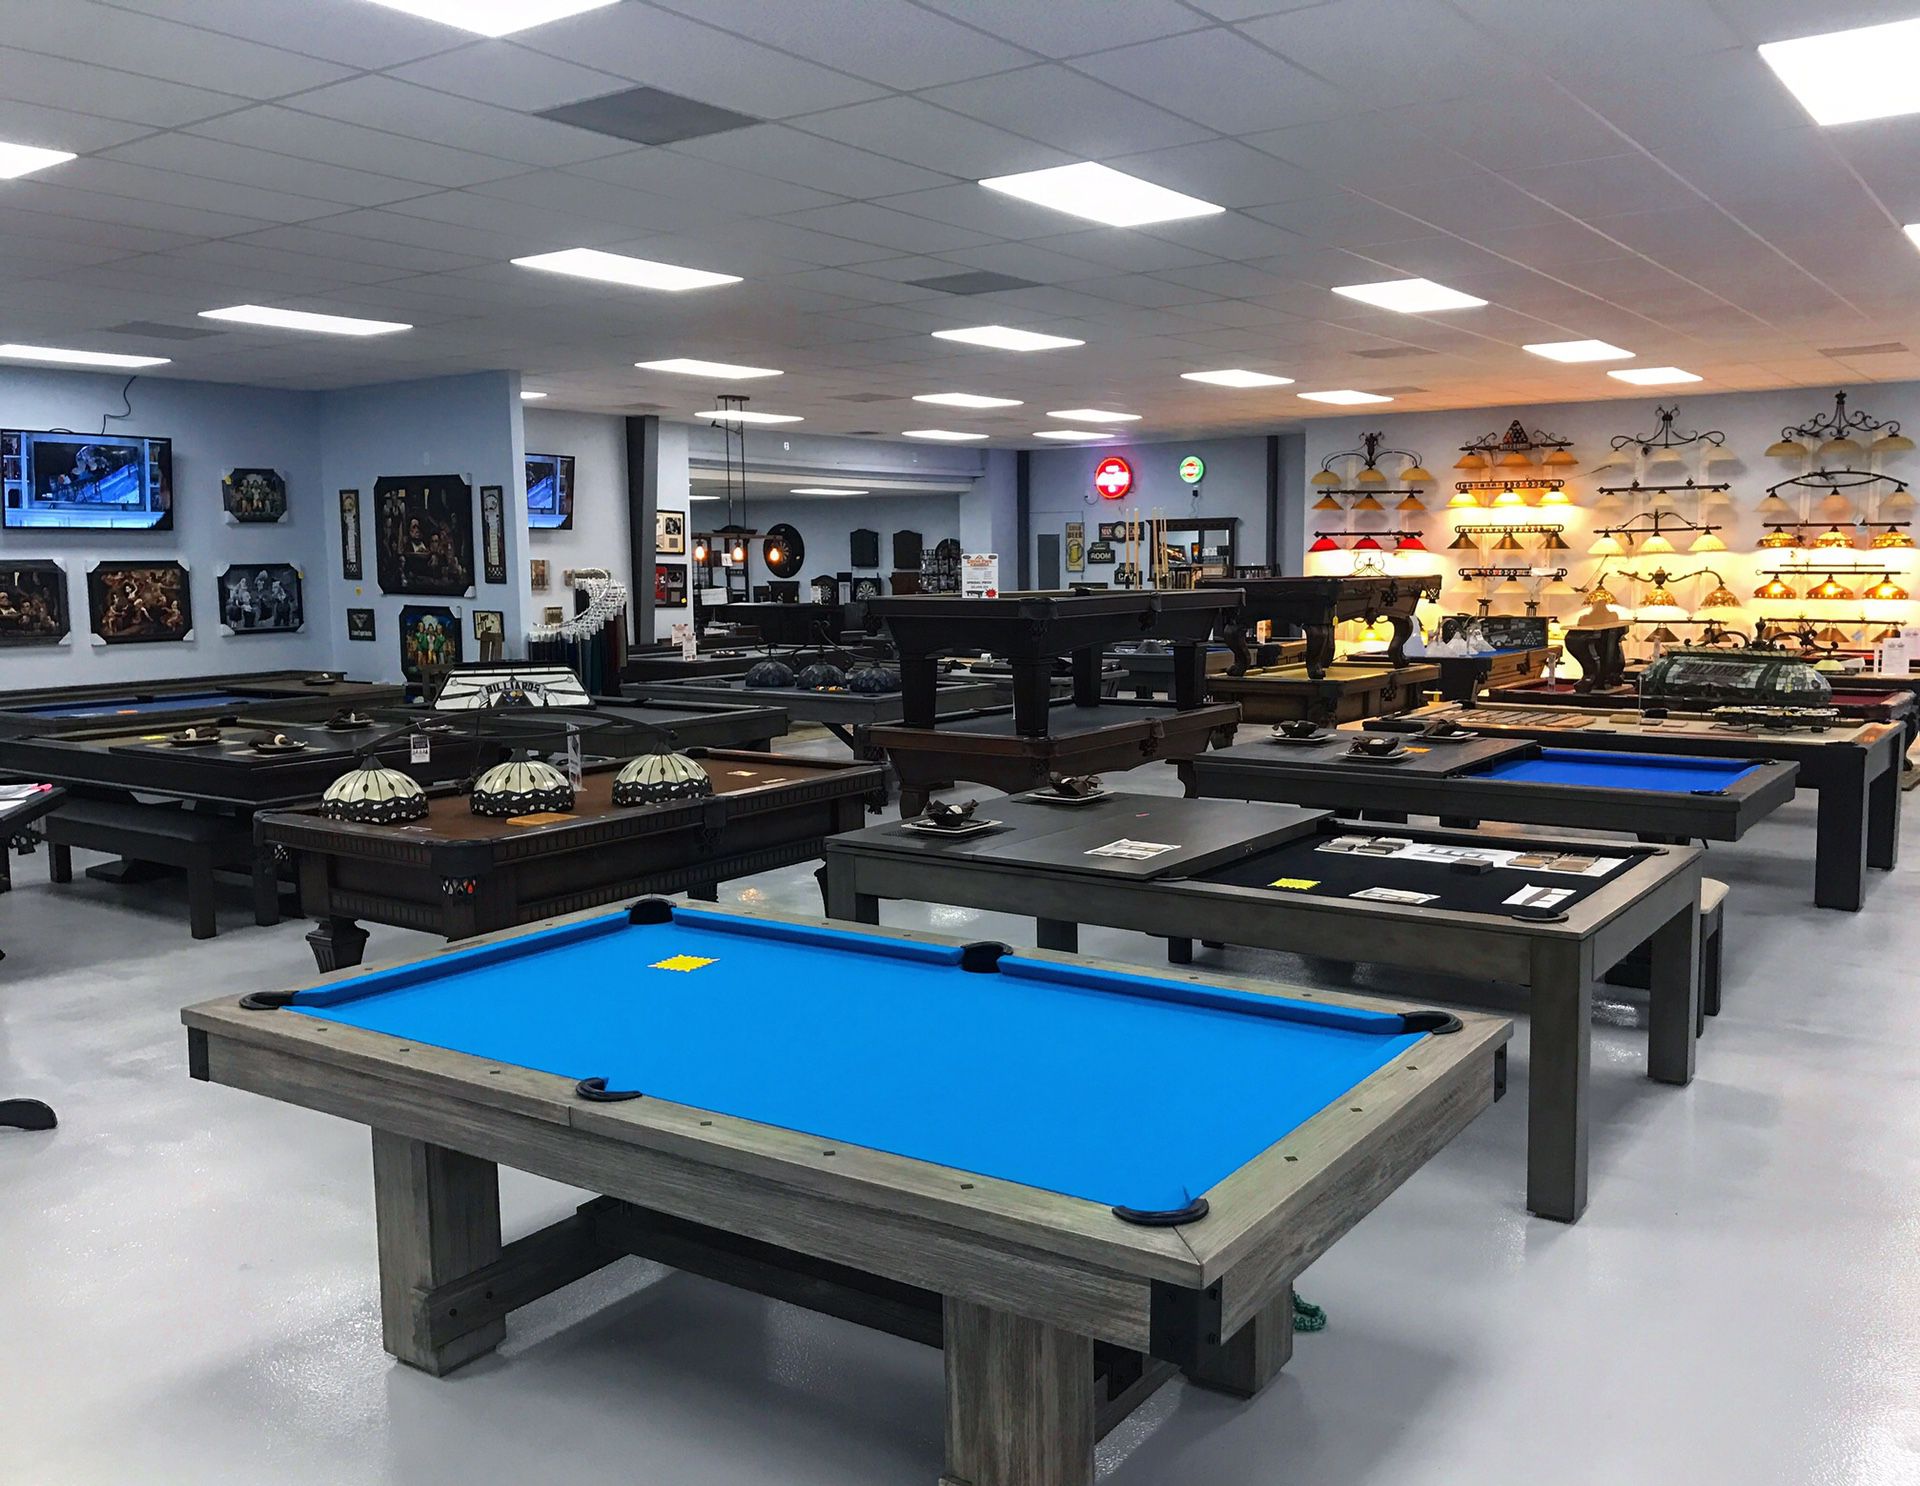 Pool Table - Arcade Games - Pinball - Theater Seating - & More